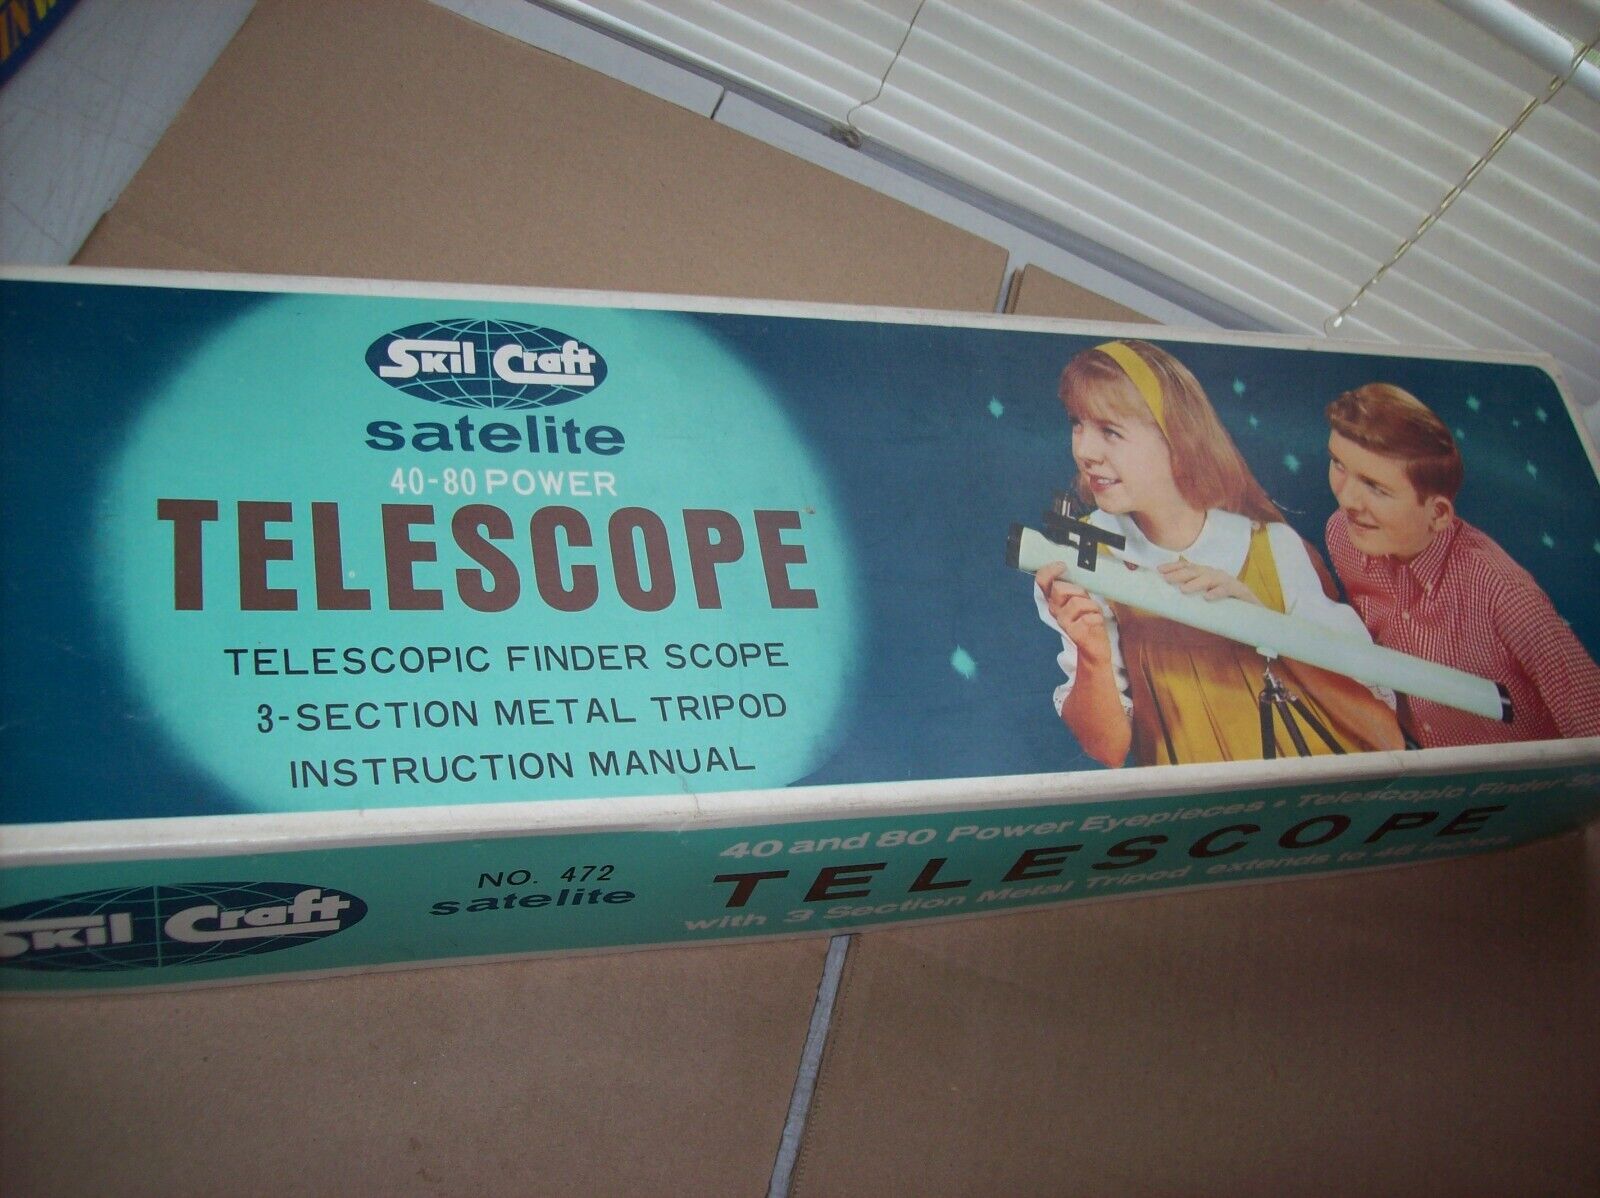 Vintage 1969 Skil Craft Telescope #472 in the box with manual